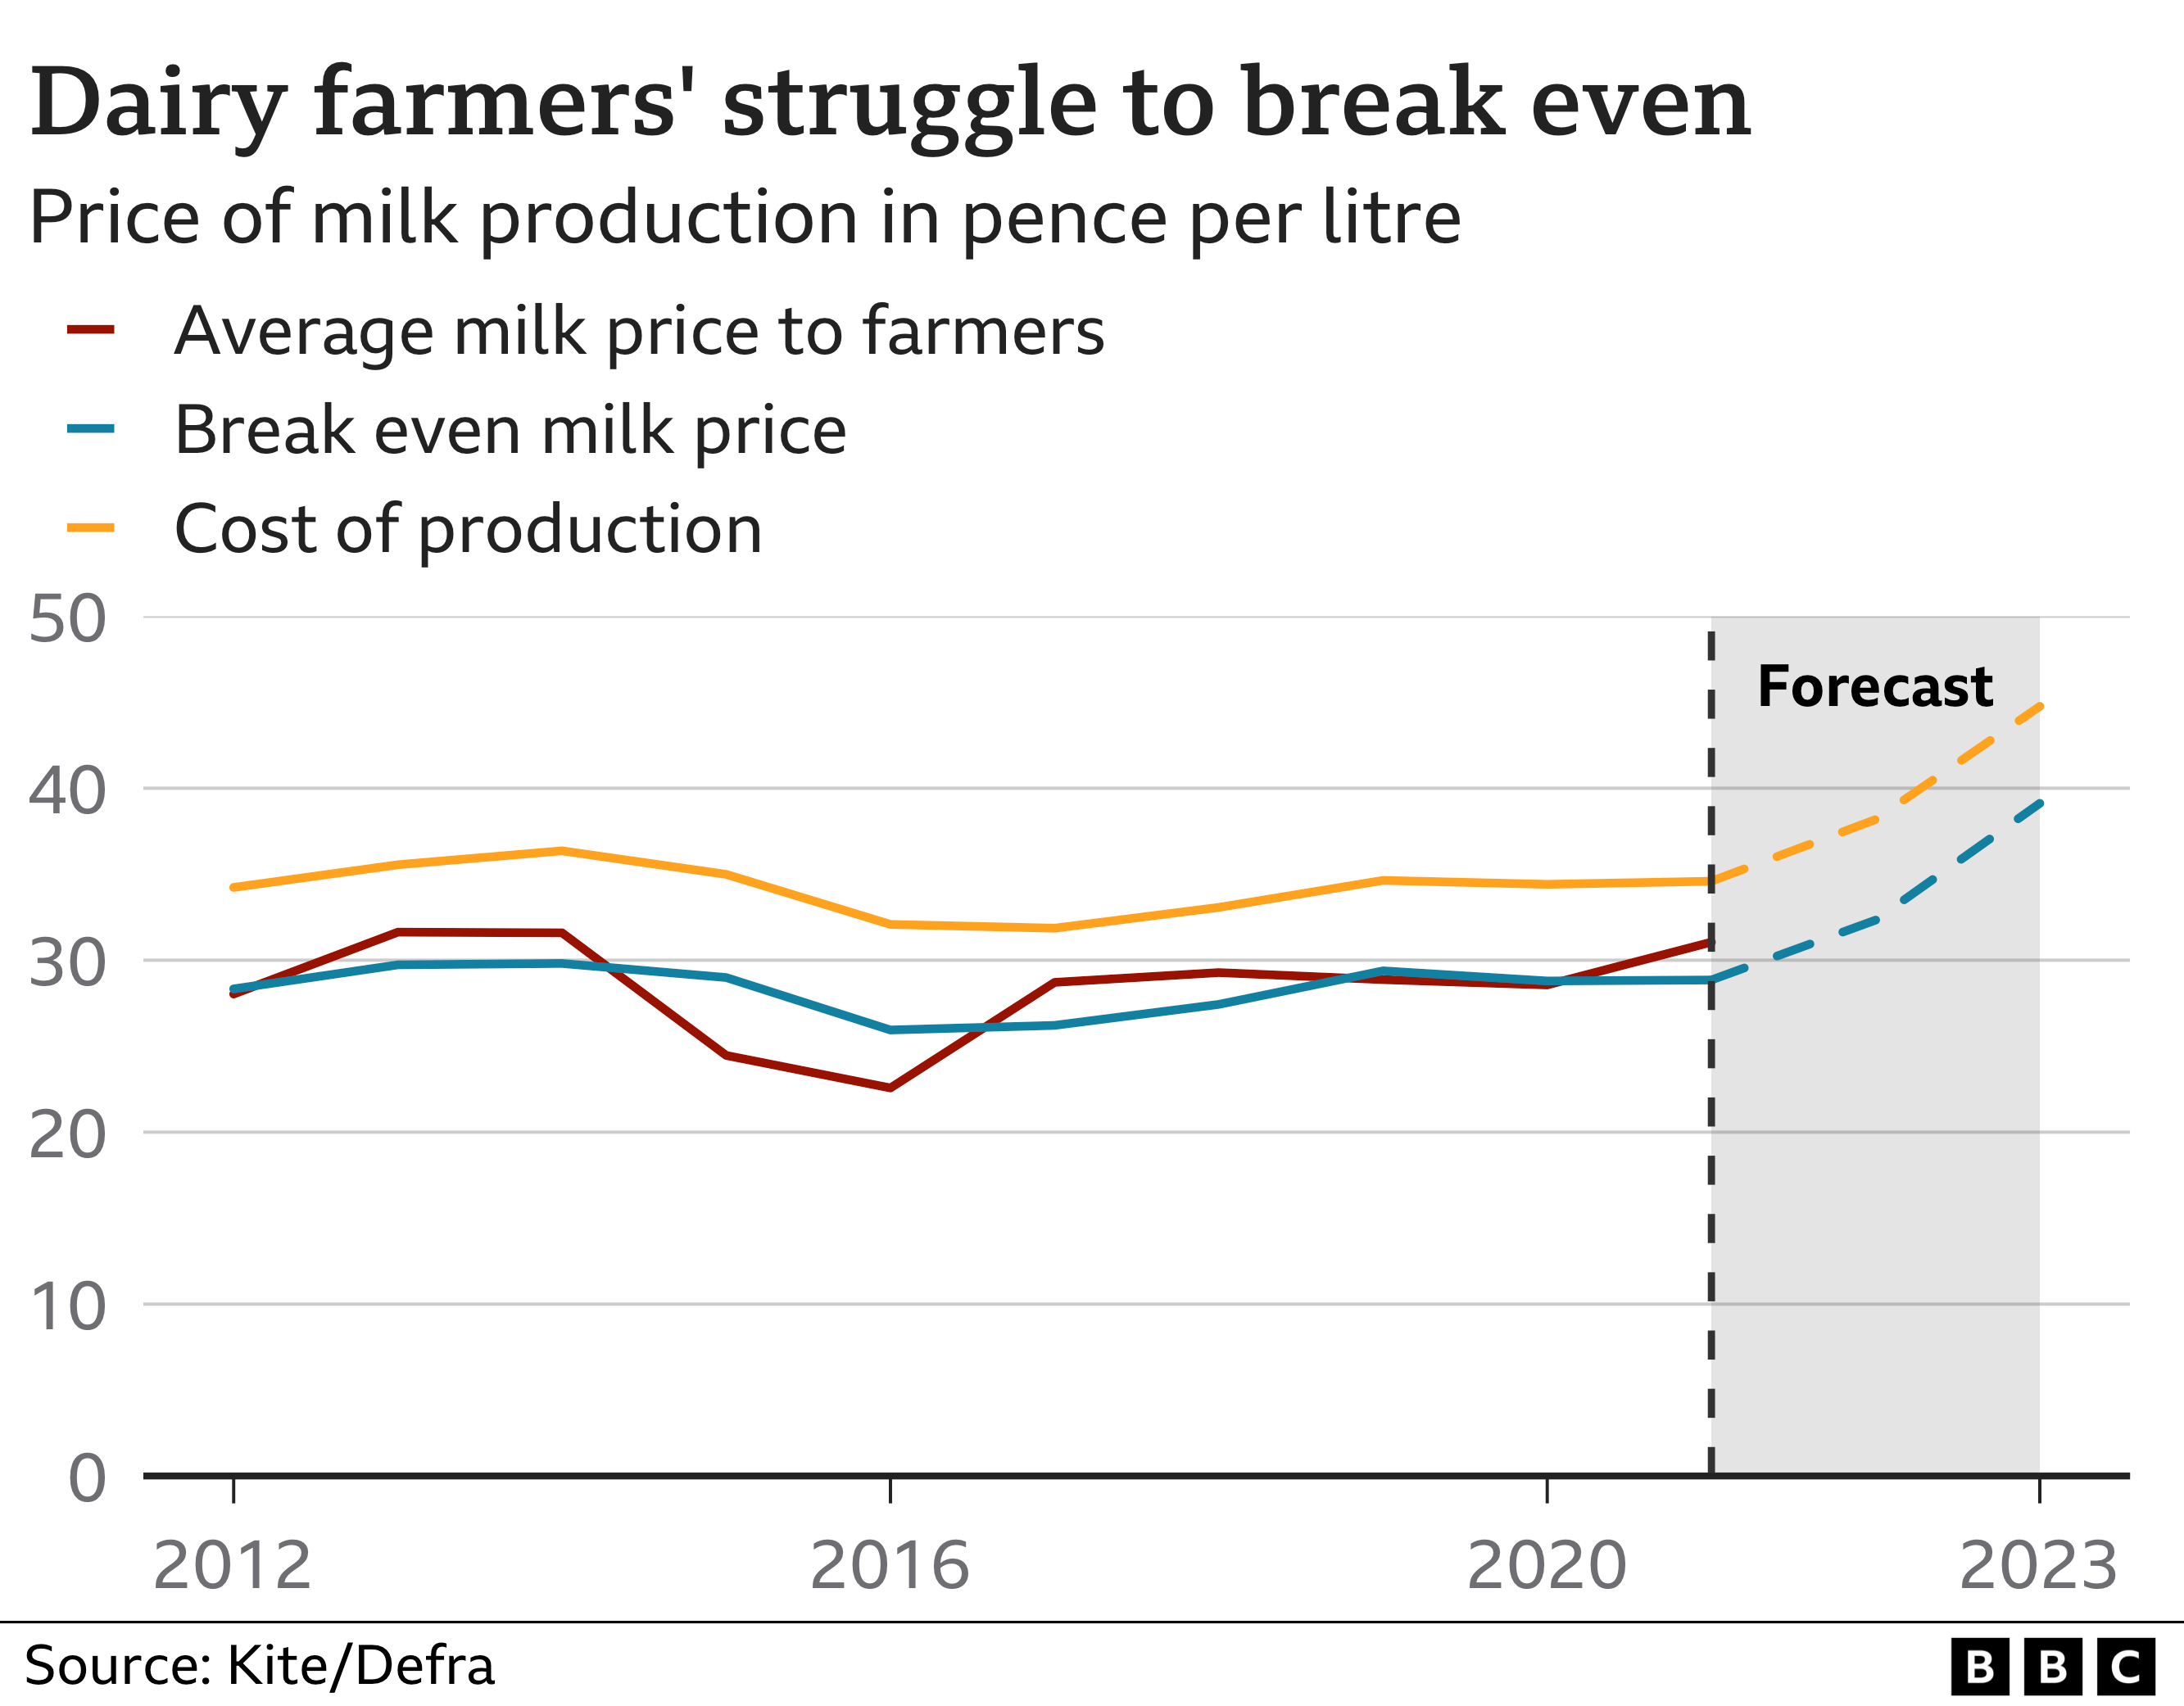 Chart showing milk price production forecast